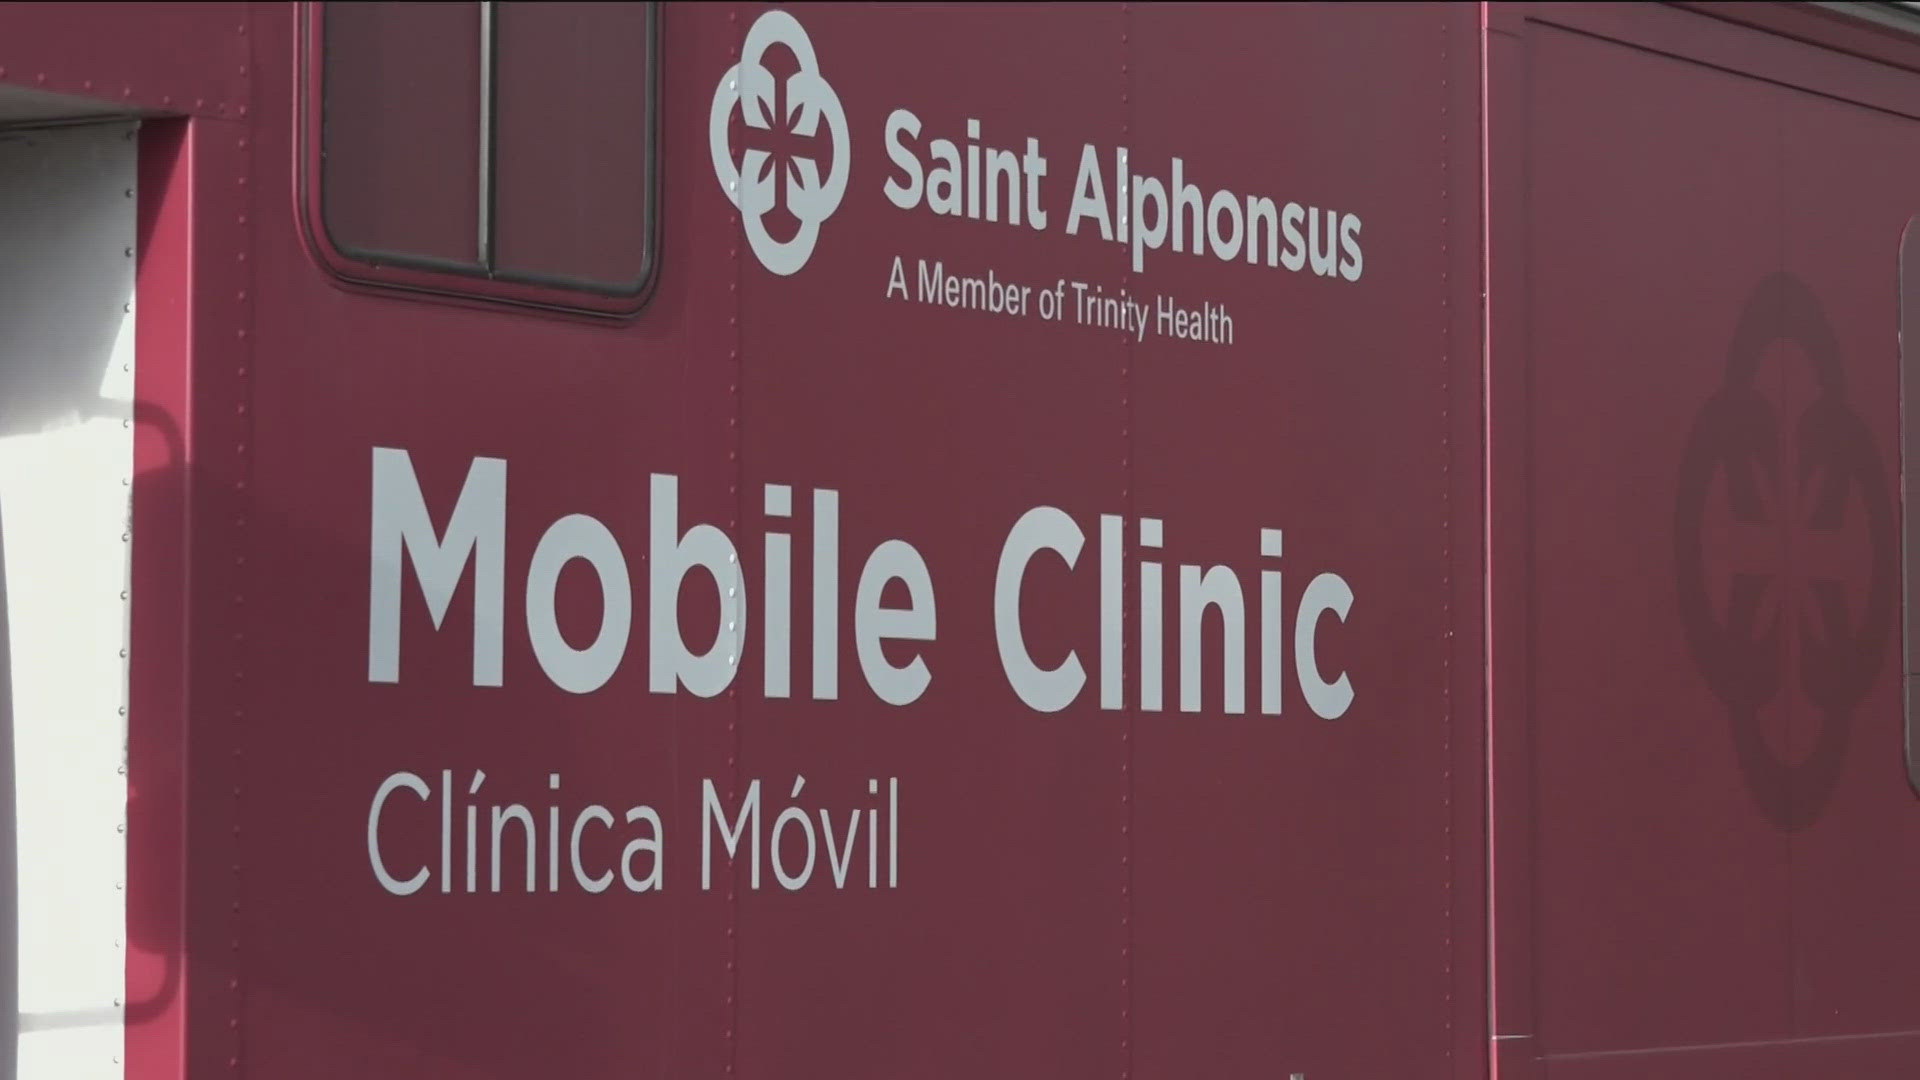 Lemmons said by going to a patient's community, mobile health clinics can reach under-served communities who may have limited access to health care facilities.